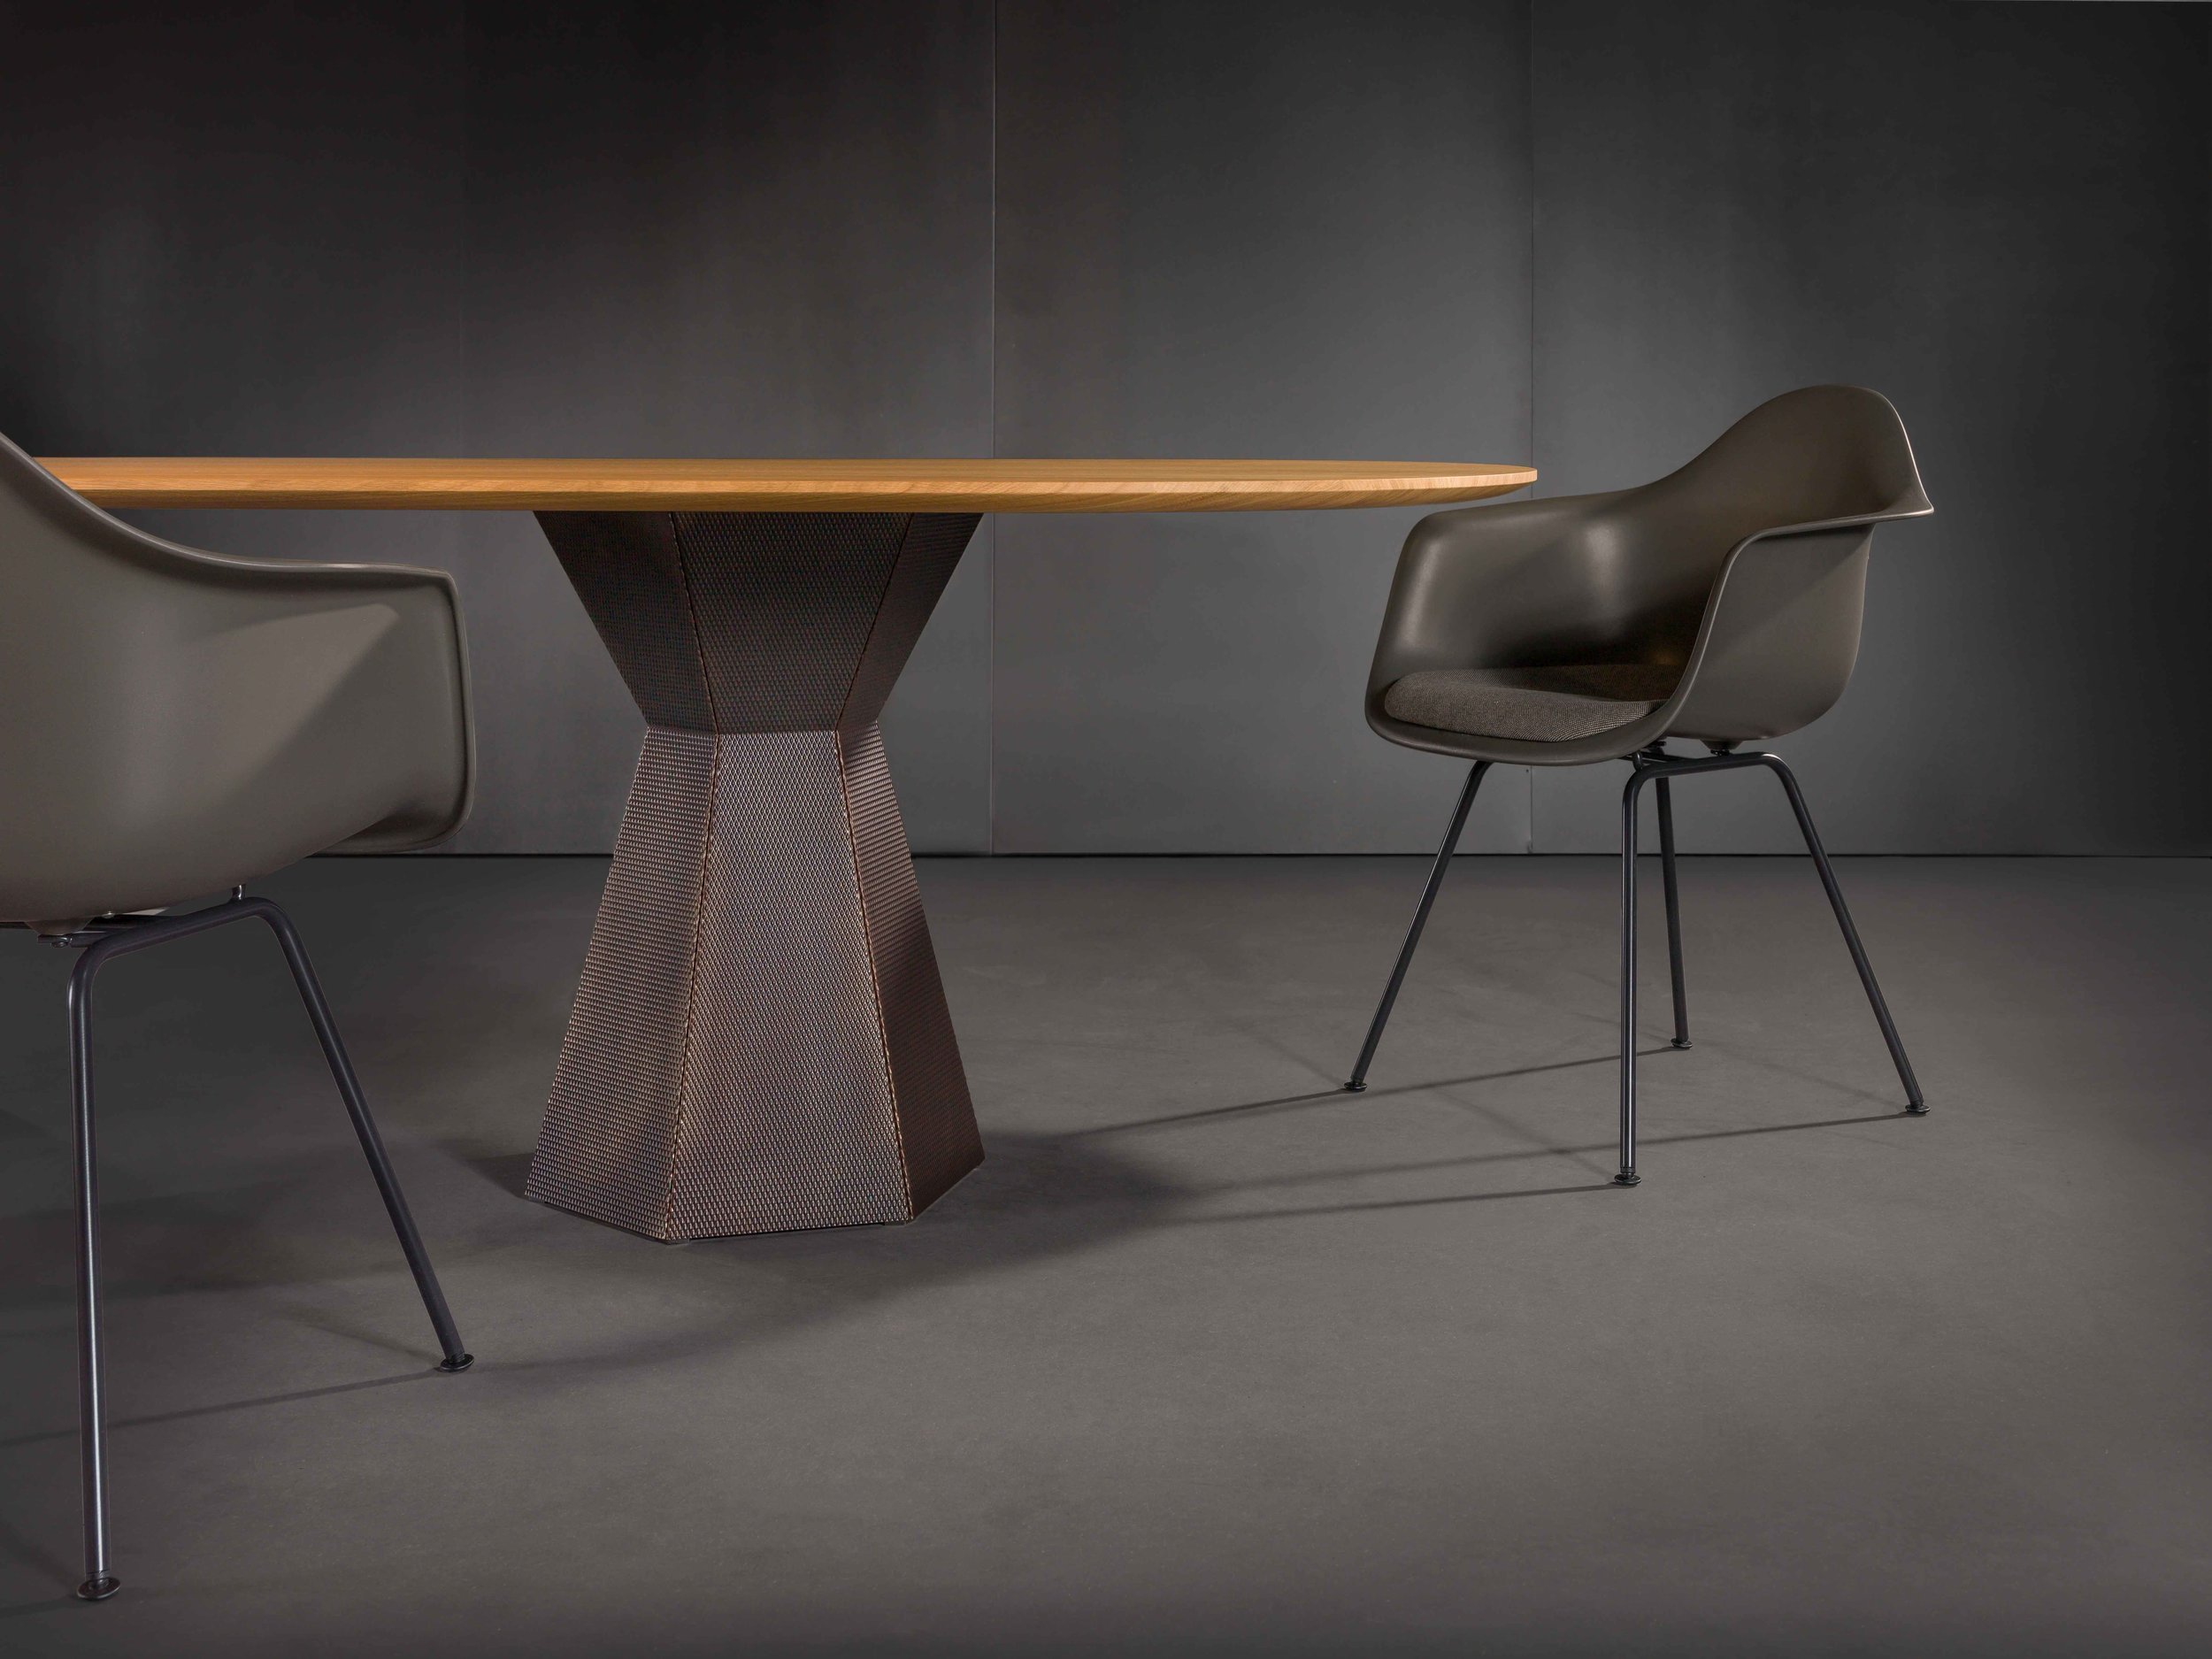 Top Oak, raw wood effect lacquered / Edge K 79 / Base Nordic brown 7000